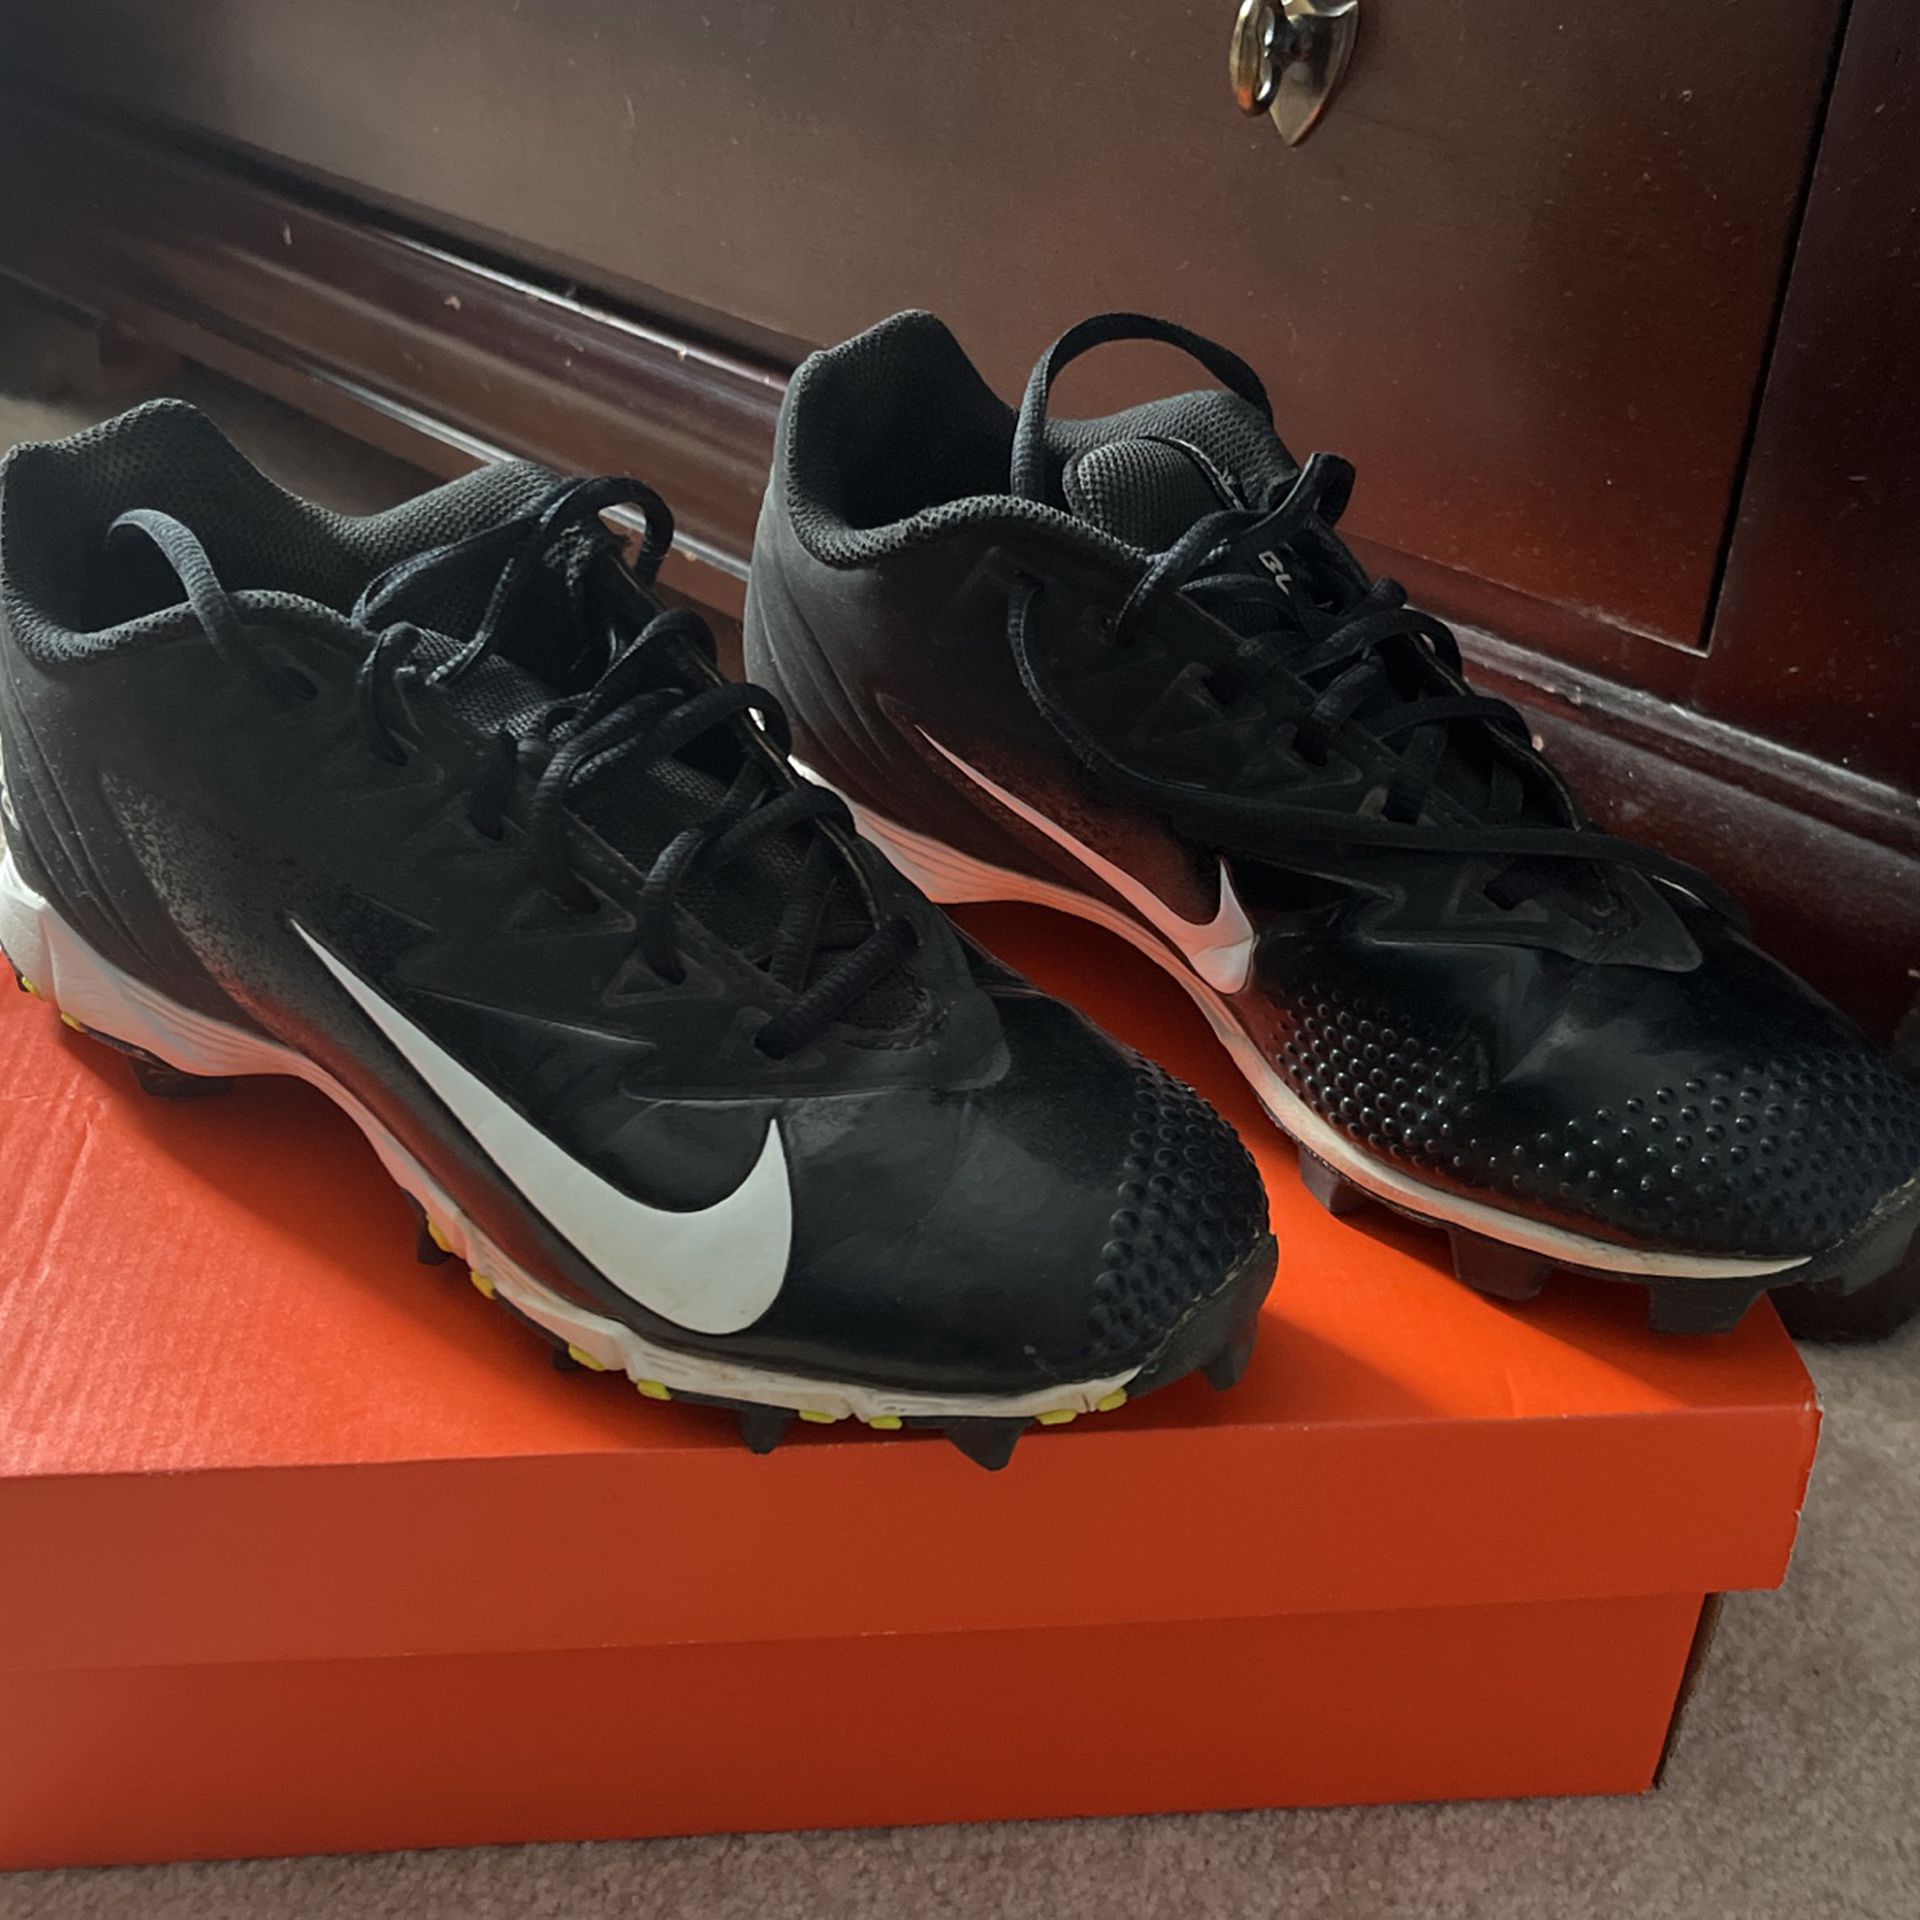 Boys youth size 7 baseball cleats used once 